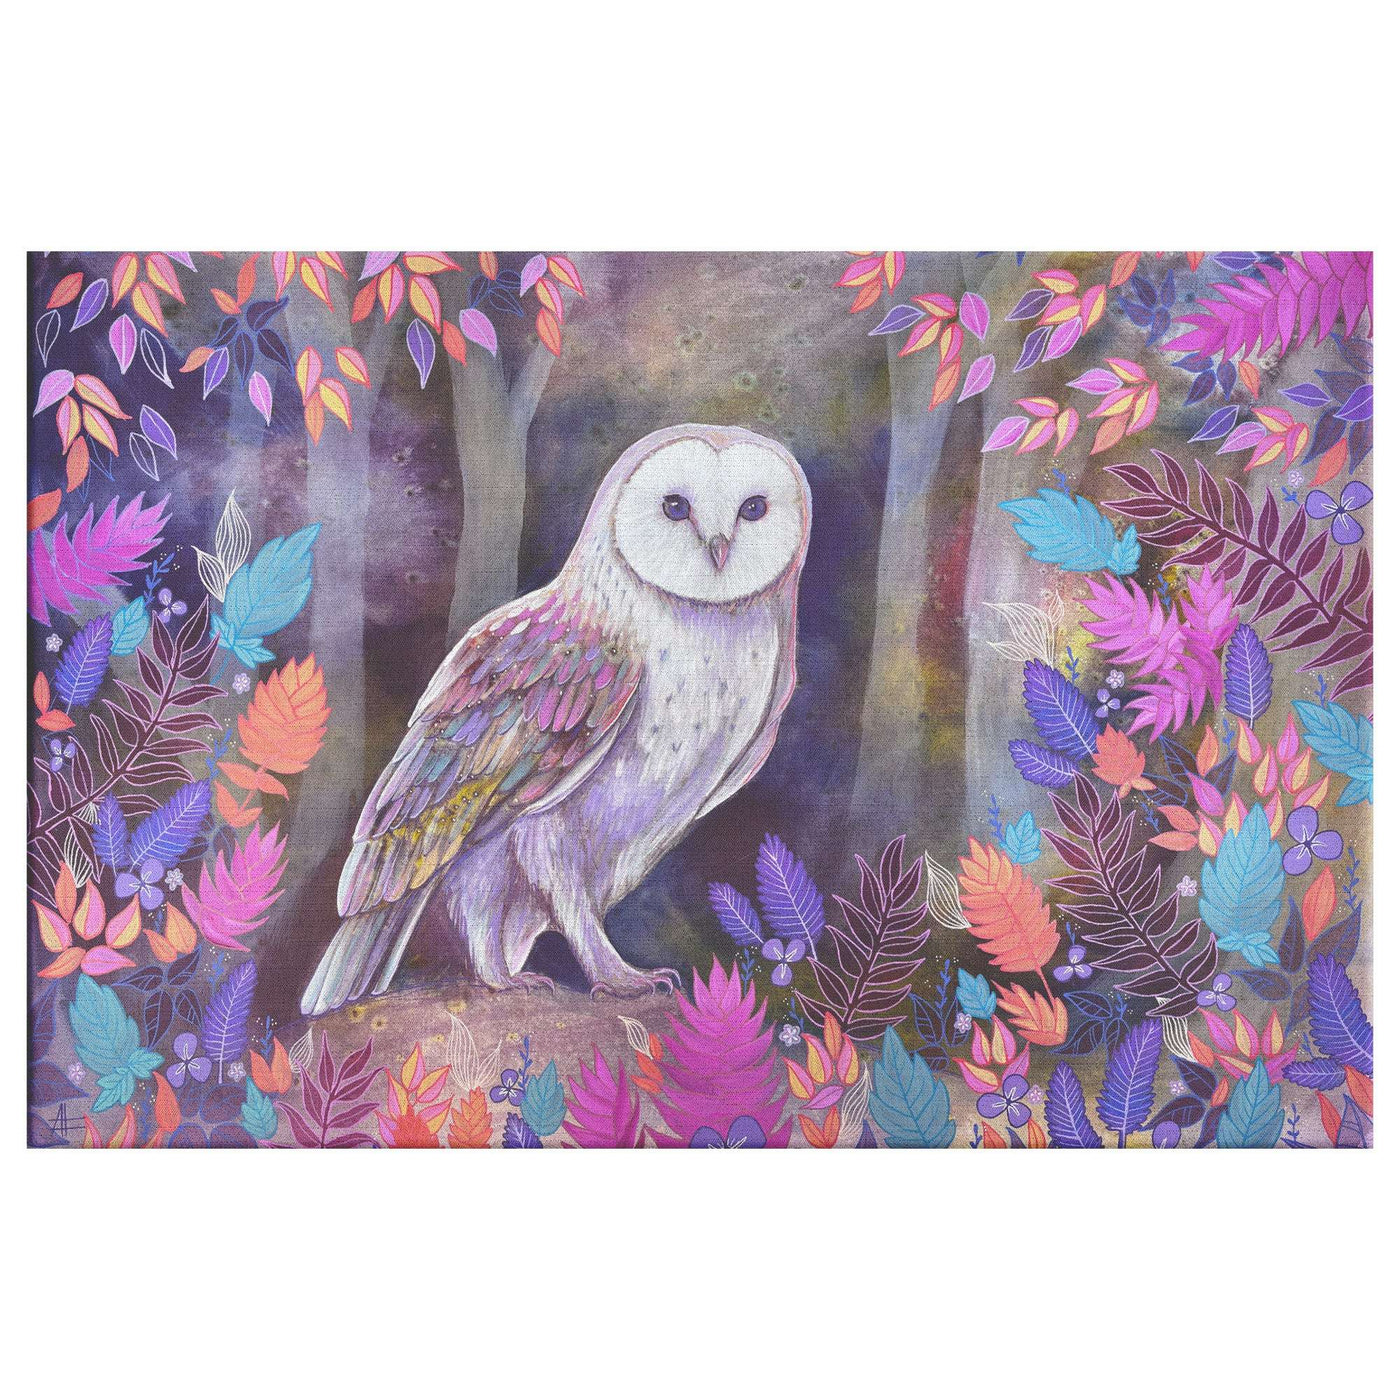 A canvas print of a painting of a white owl perched amid vibrant, multi-colored foliage with a purple and brown textured background.